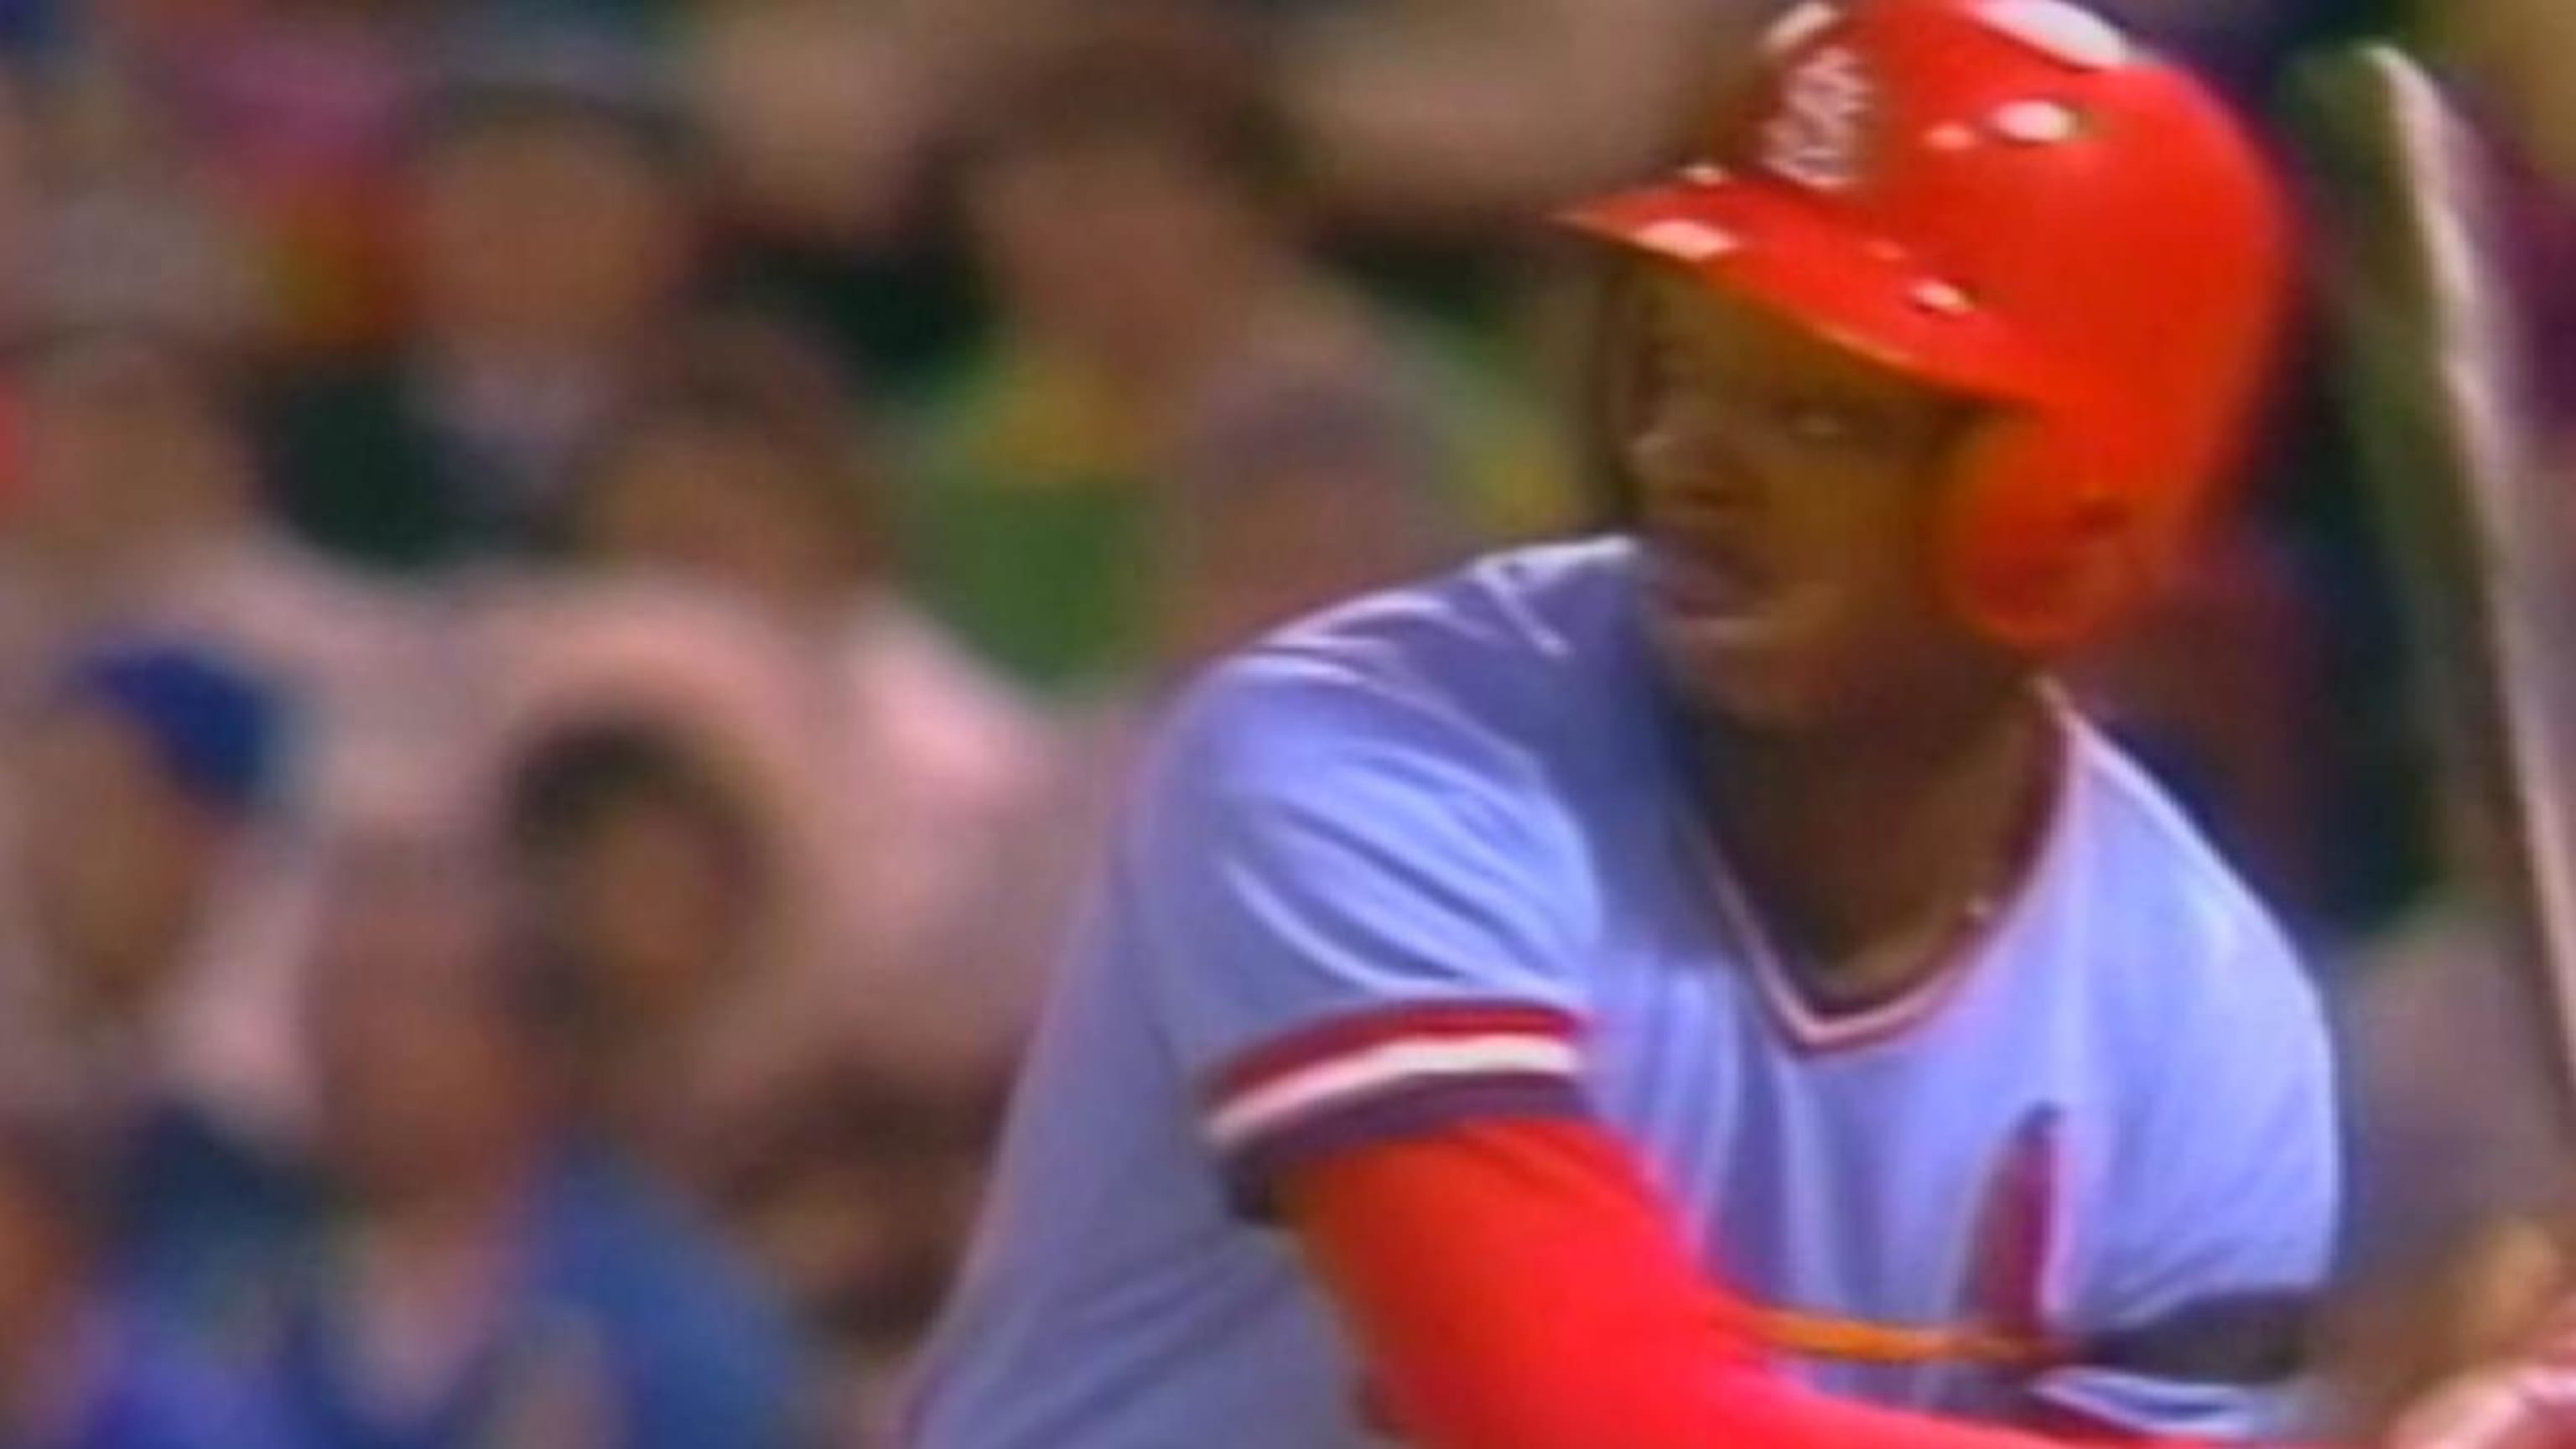 80s Baseball - 10/21/81 The Yankees trade minor league OF Willie McGee to  the Cardinals for pitcher Bob Sykes. That worked out well for St. Louis.